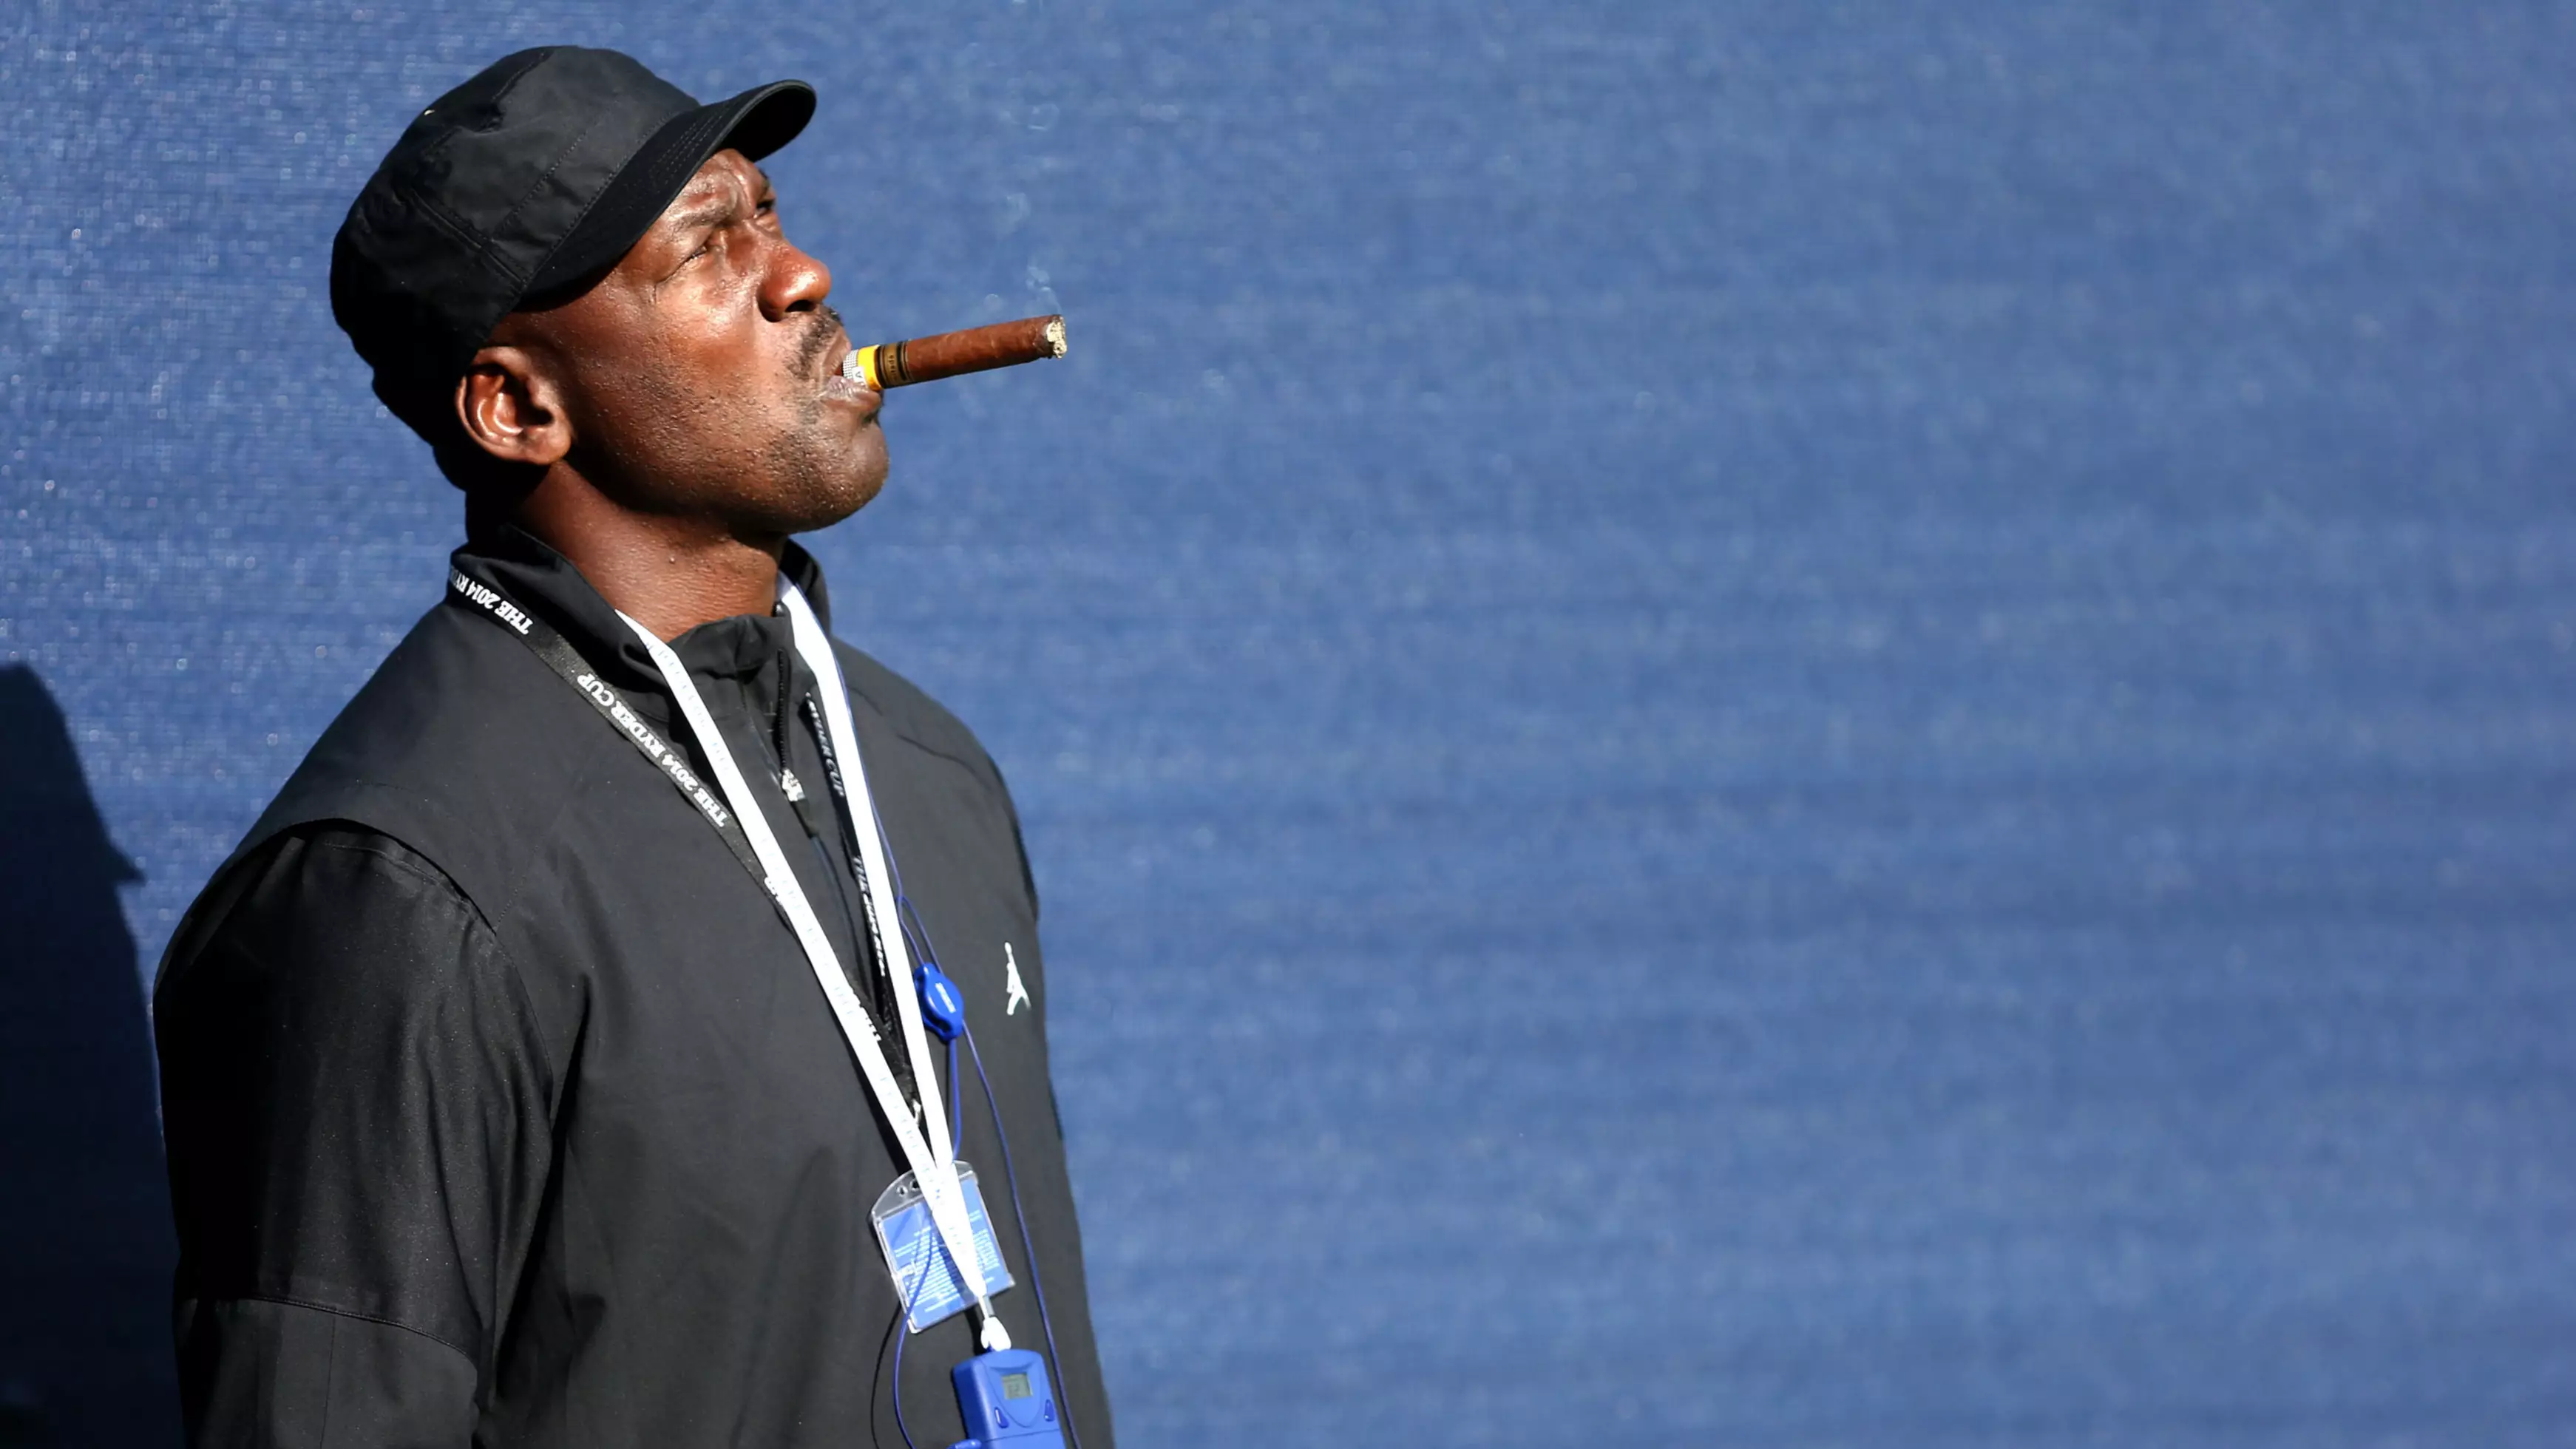 Michael Jordan's New Golf Course Uses Drones To Deliver Beer And Snacks To Players